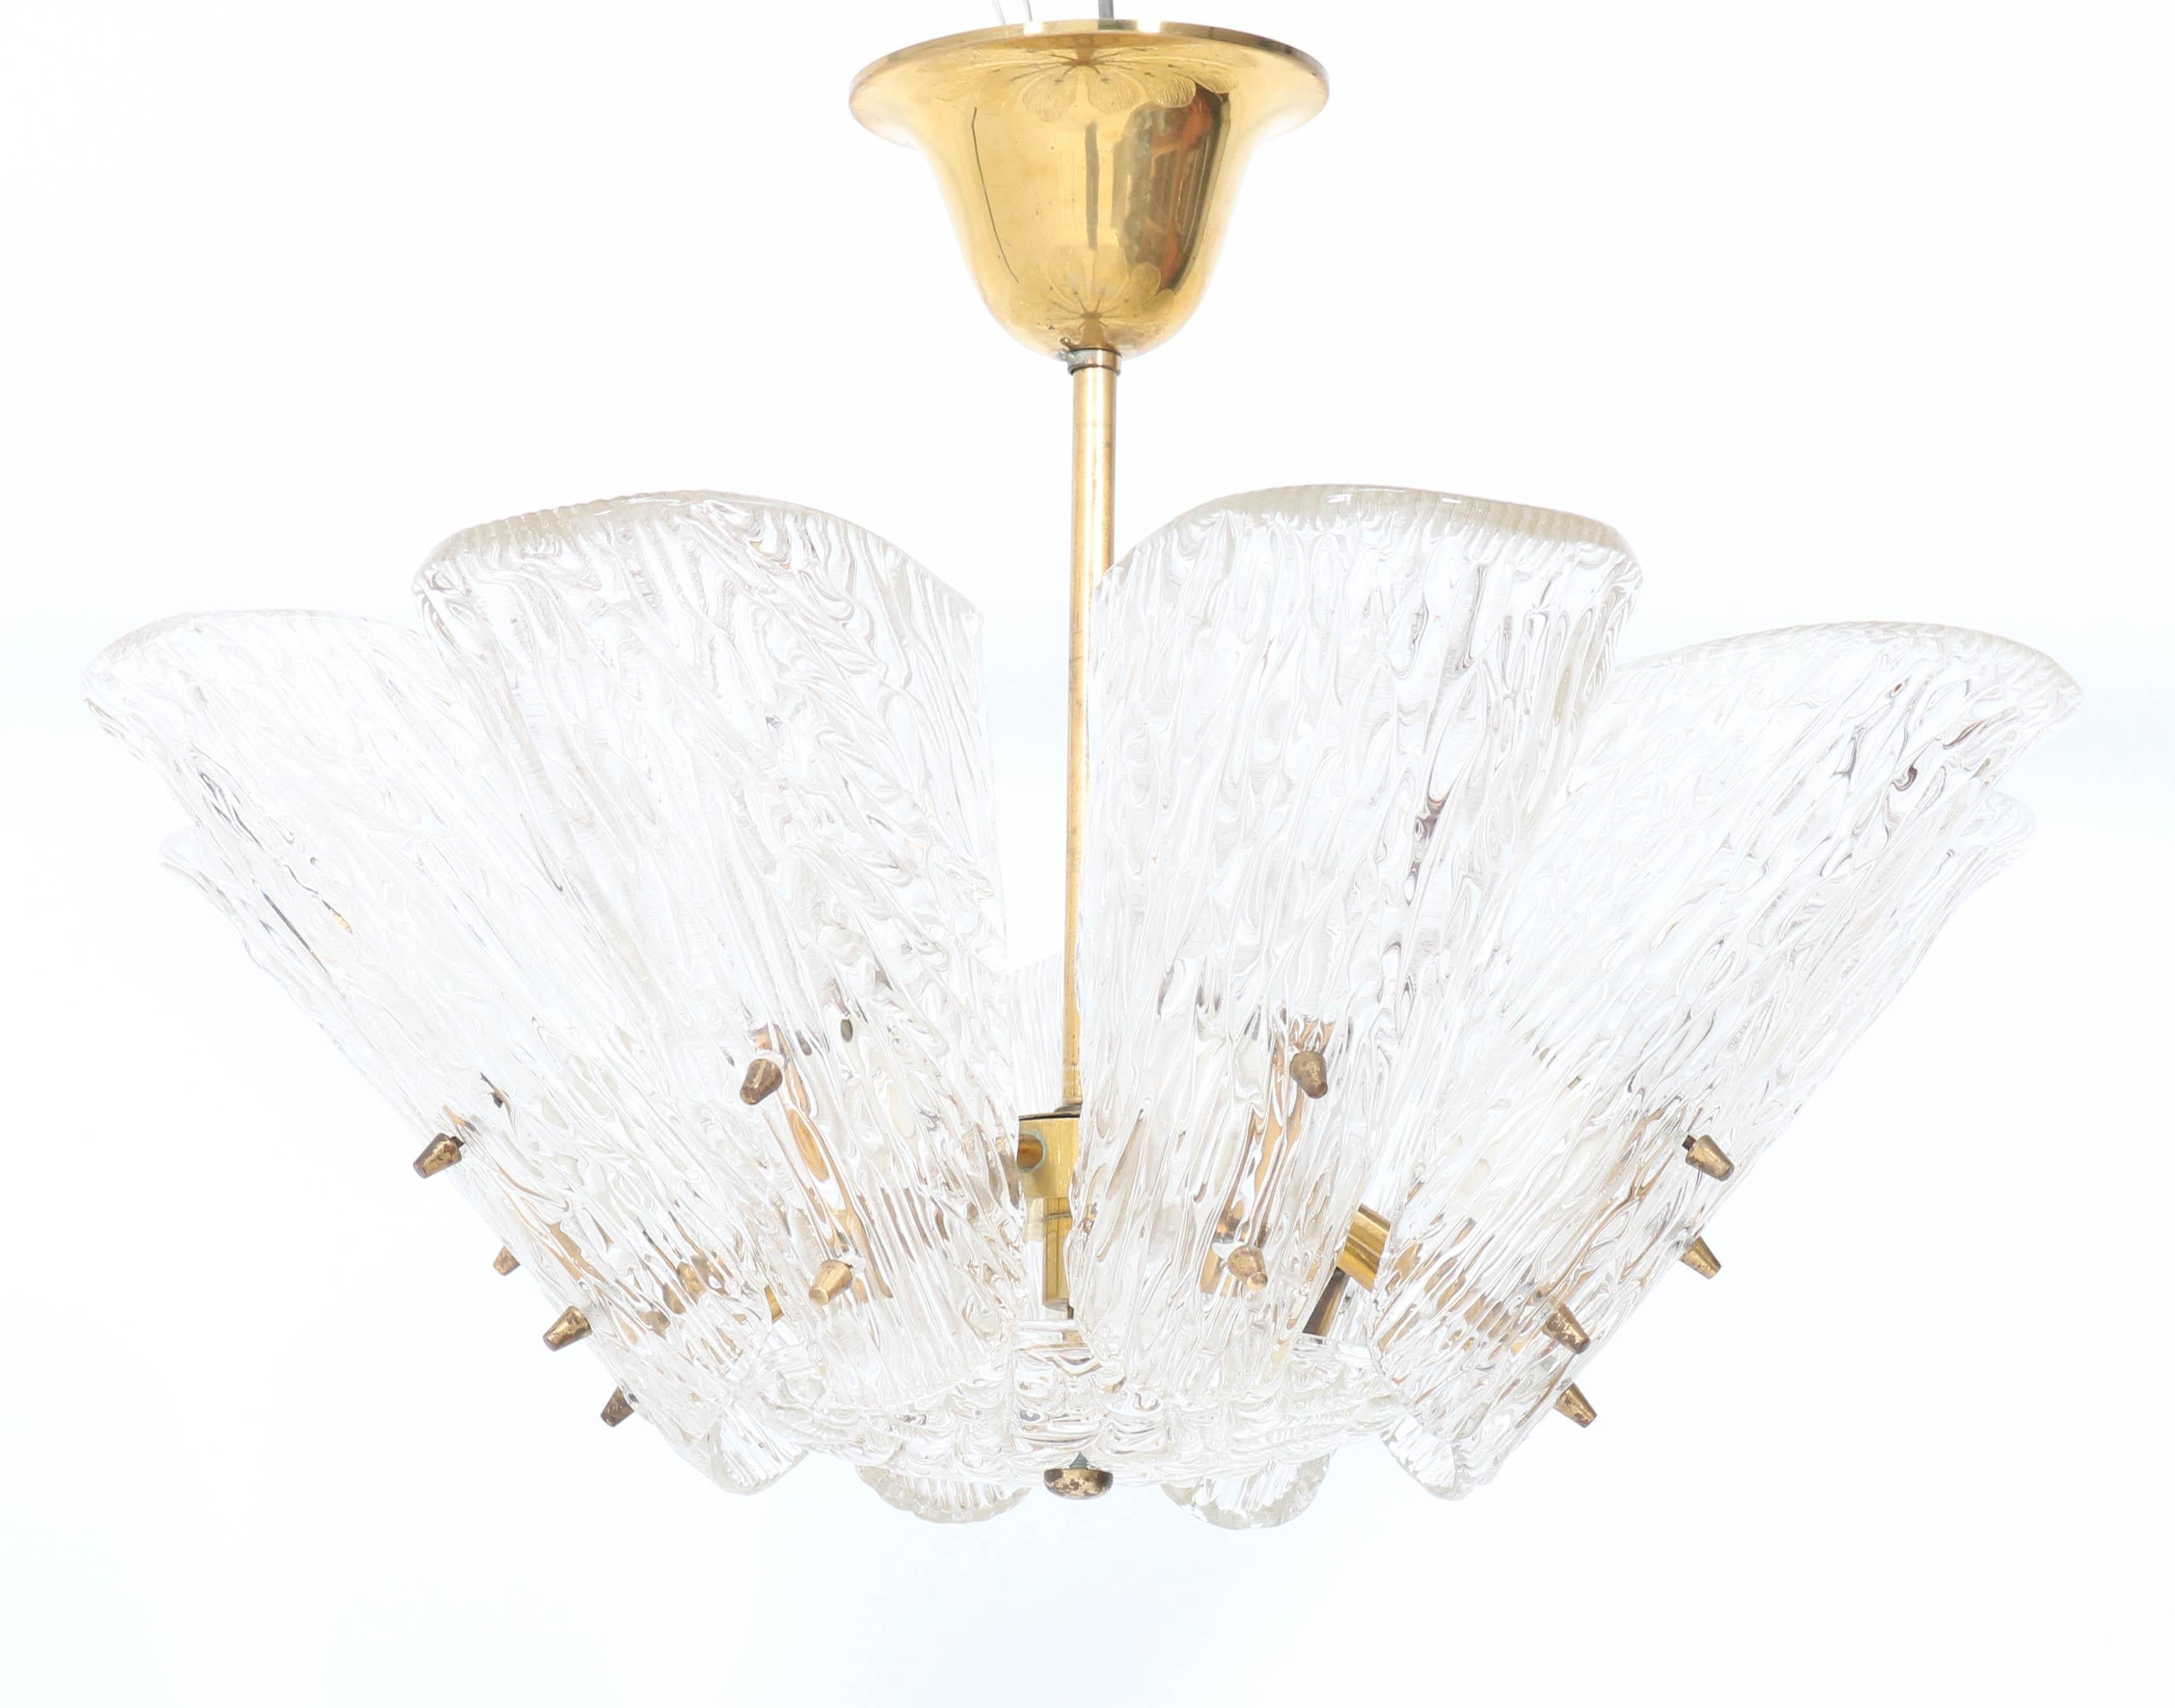 Magnificent Mid-Century Modern chandelier.
Design by J.T. Kalmar.
Striking Austrian design from the 1950s.
Brass frame with eight original ice glass shades.
Rewired with eight original sockets for E-14 light bulbs.
In very good condition with a